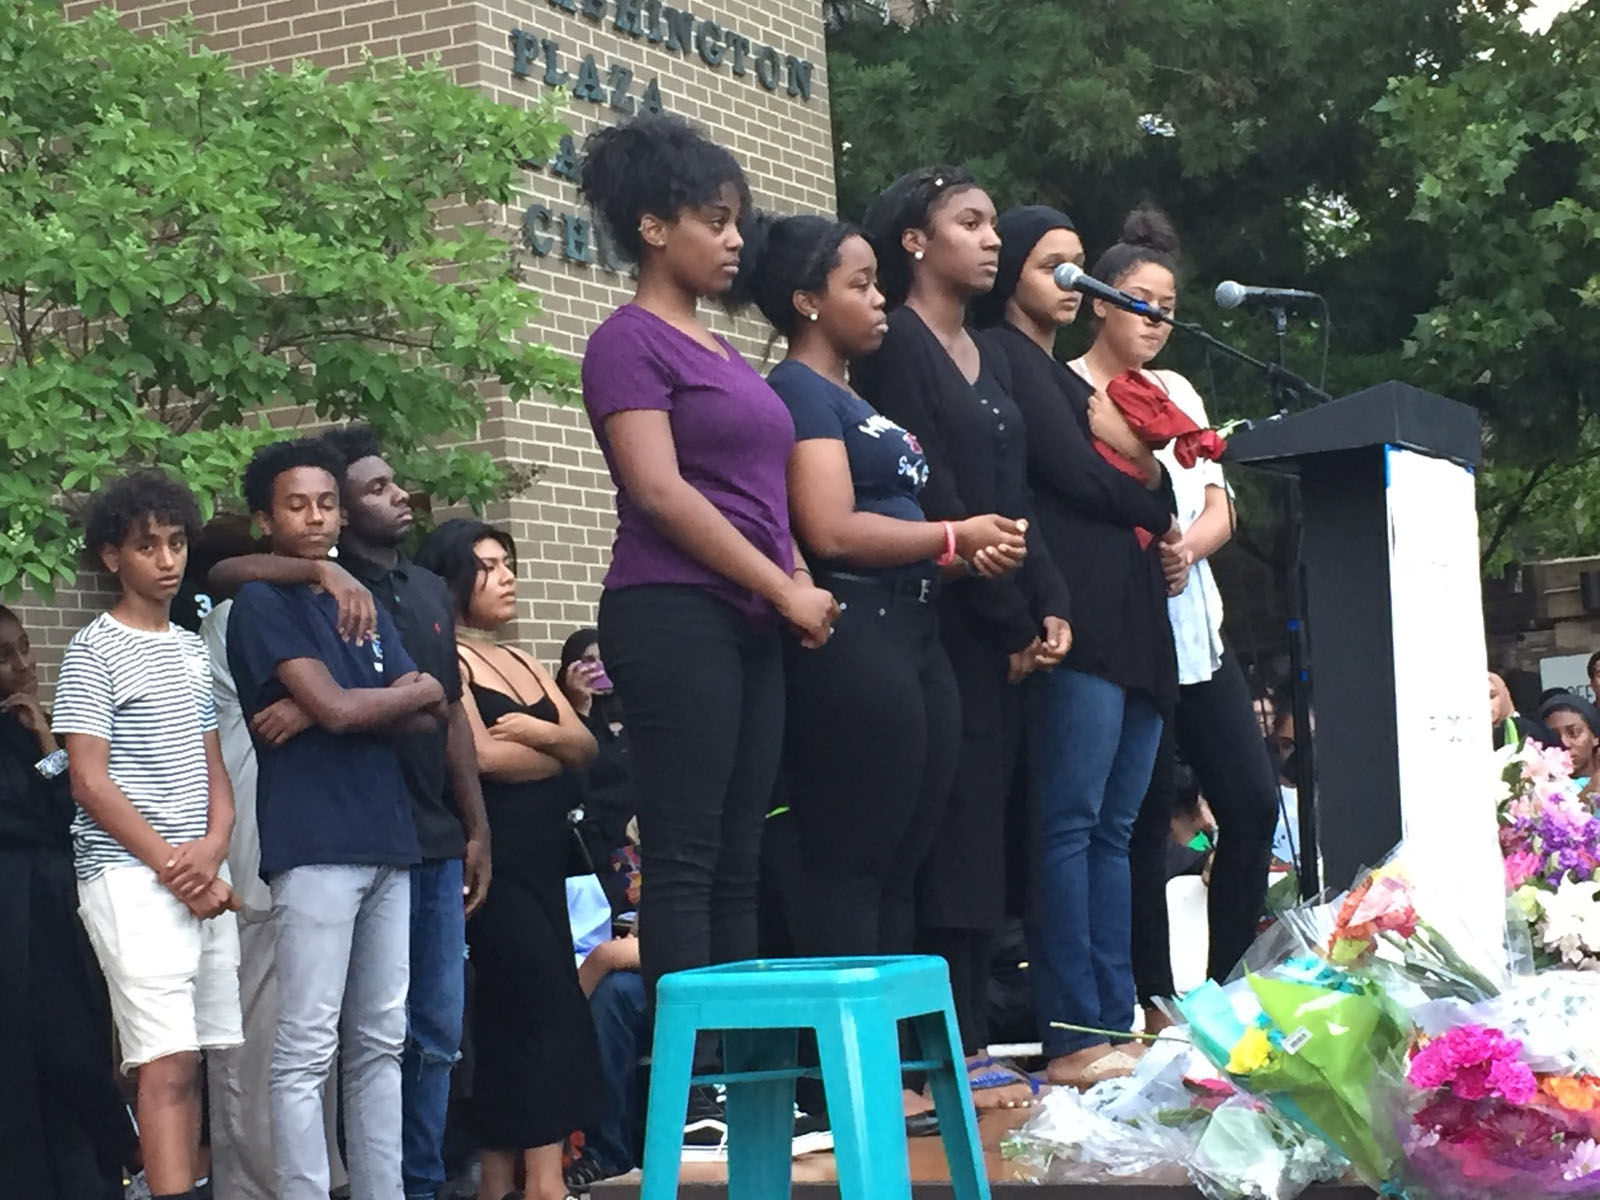 "Don't forget her name."
 Friends of Nabra Hassanen gather at a vigil in honor of Nabra on Wednesday, June 21, 2017, in Reston, Va.
 (WTOP/Michelle Basch)